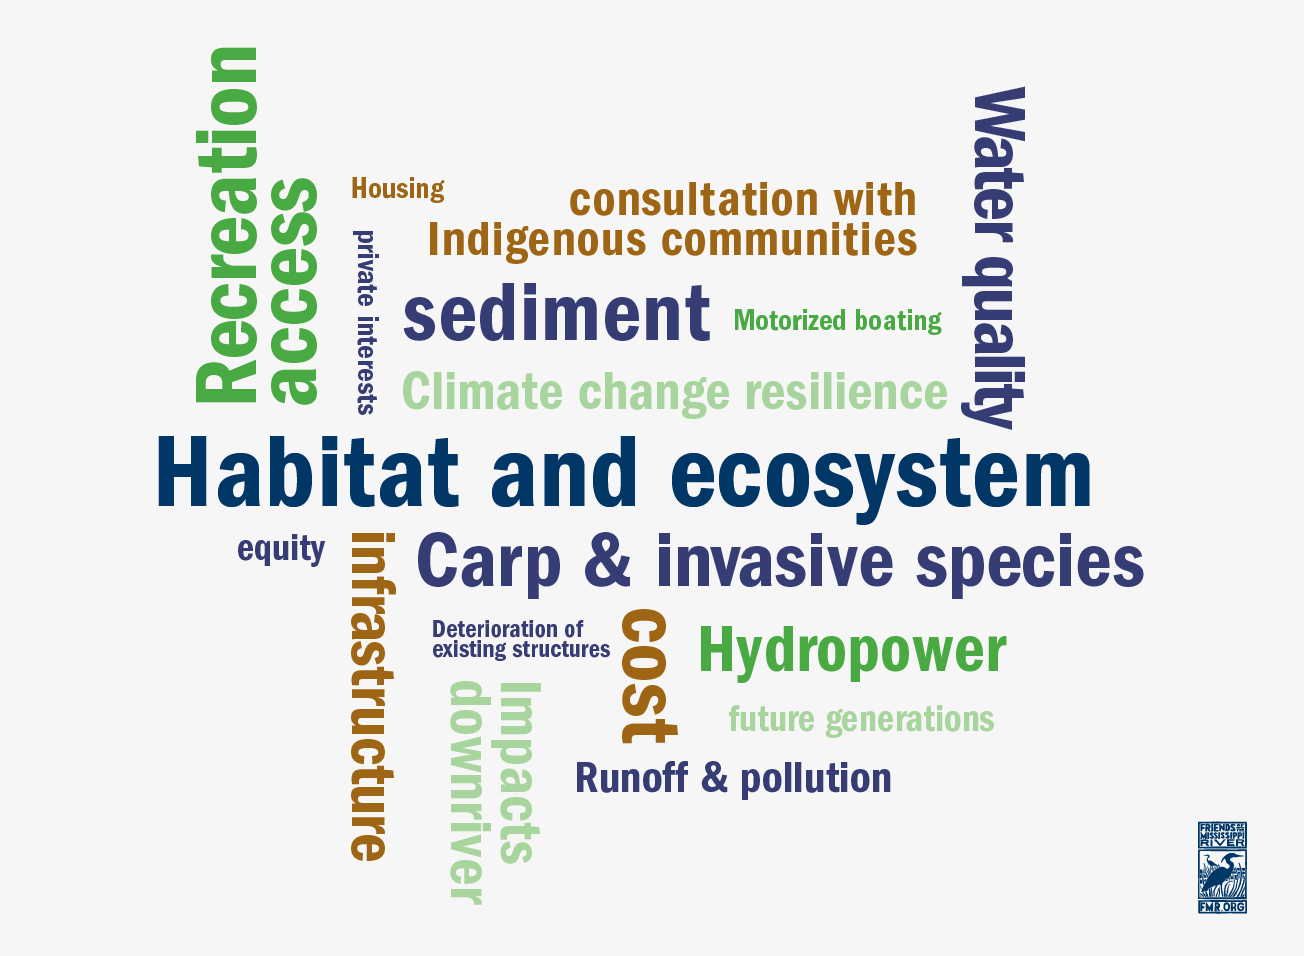 A word cloud showing the most common topics mentioned by River Guardians in comments to the Army Corps.